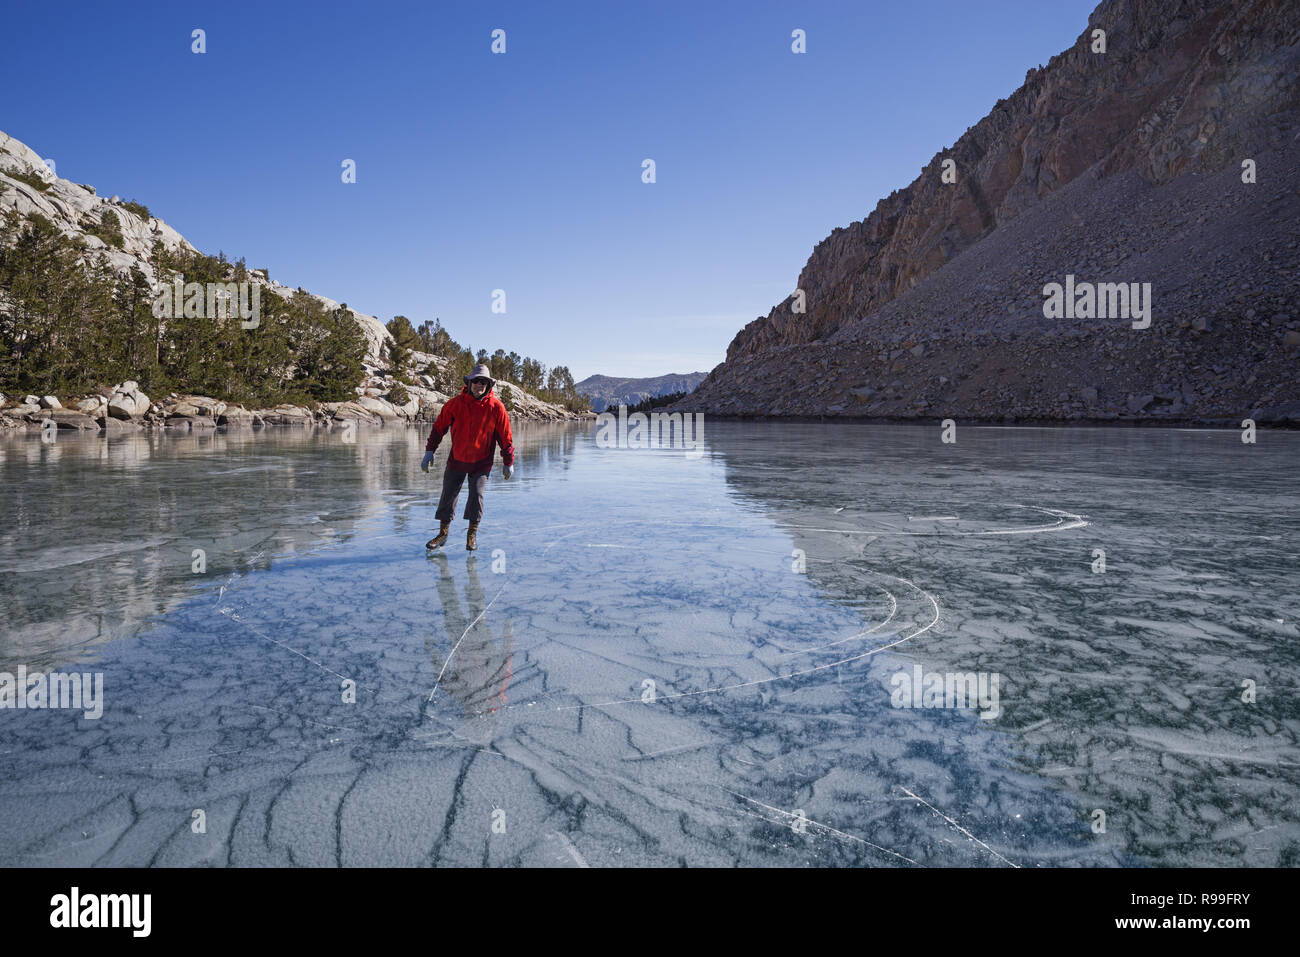 man in red jacket ice skating on frozen mountain lake Loch Leven in the Sierra Nevada Mountains Stock Photo